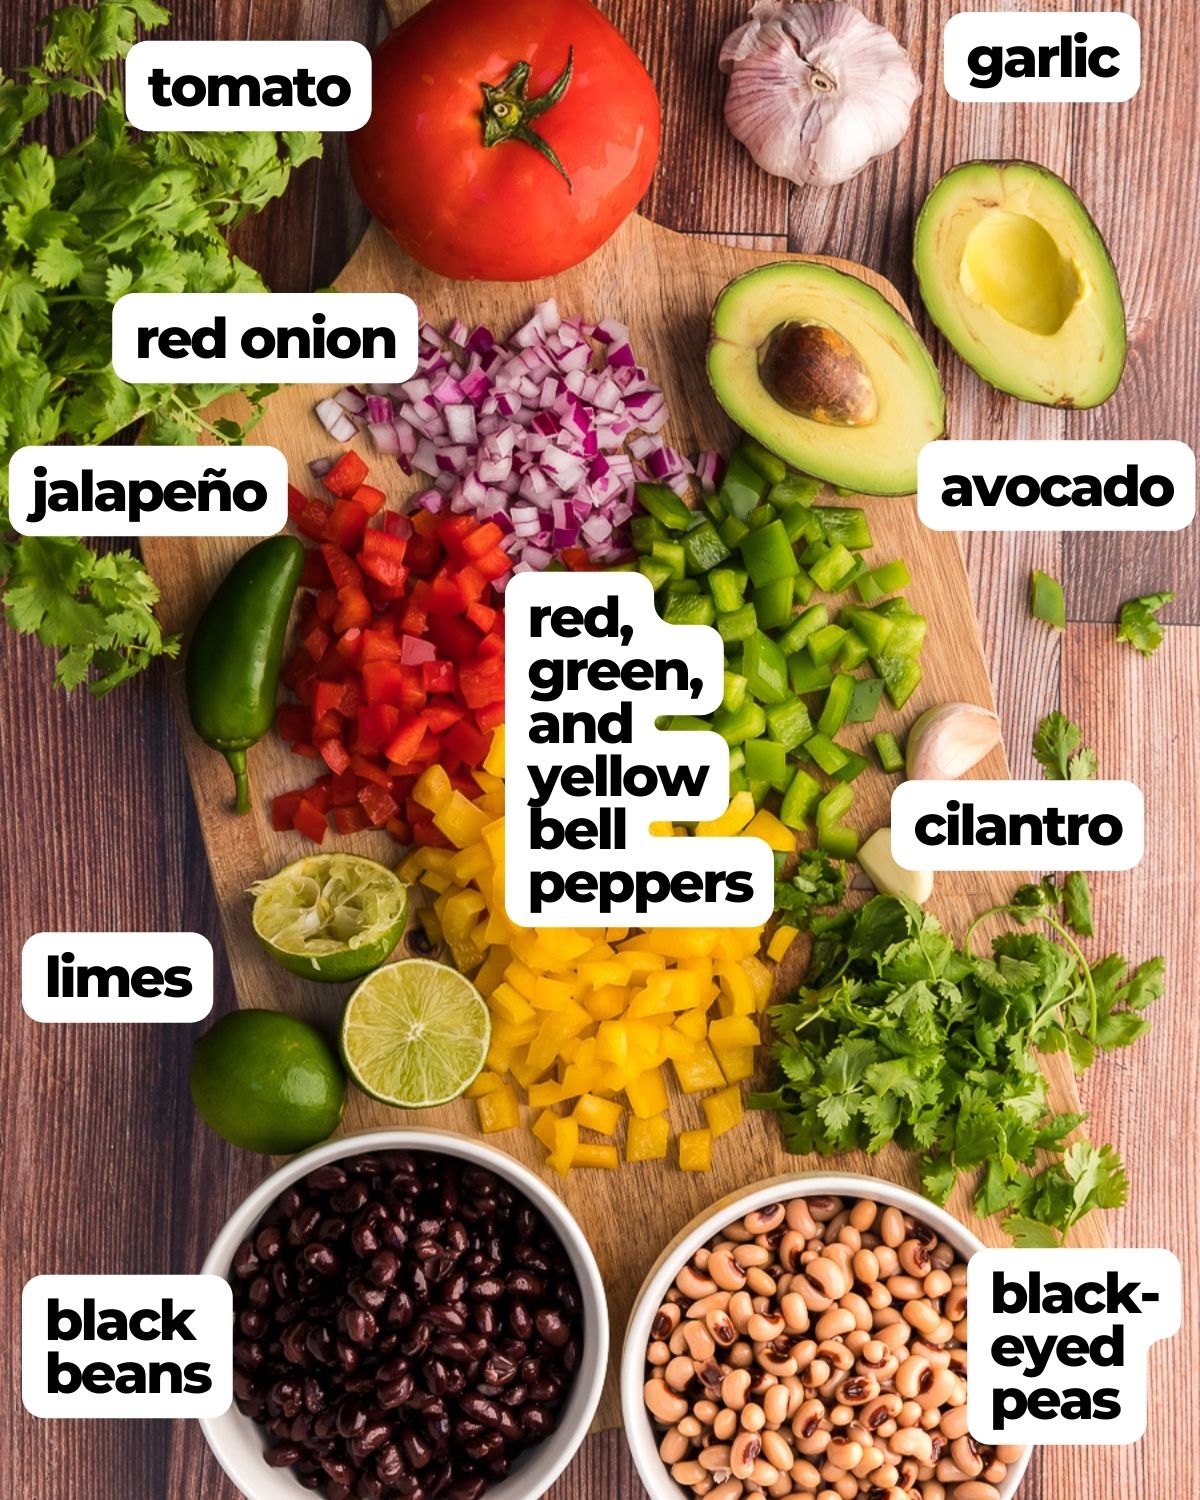 cowboy caviar ingredients labeled tomato, garlic, red onion, avocado, jalapeno, bell peppers, cilantro, lime juice, black-eyed peas, black beans